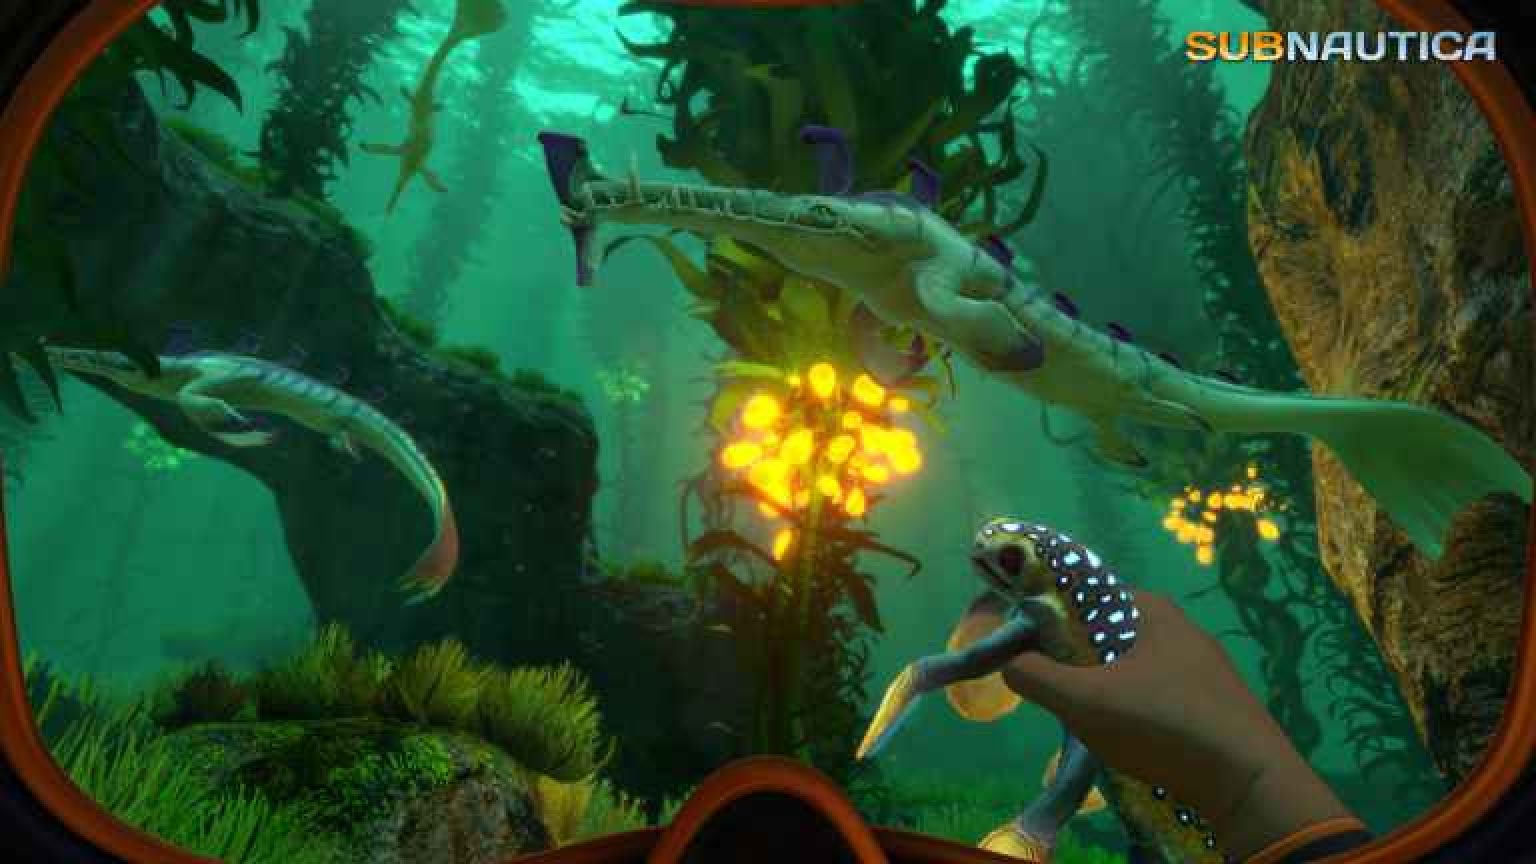 how to get subnautica free download